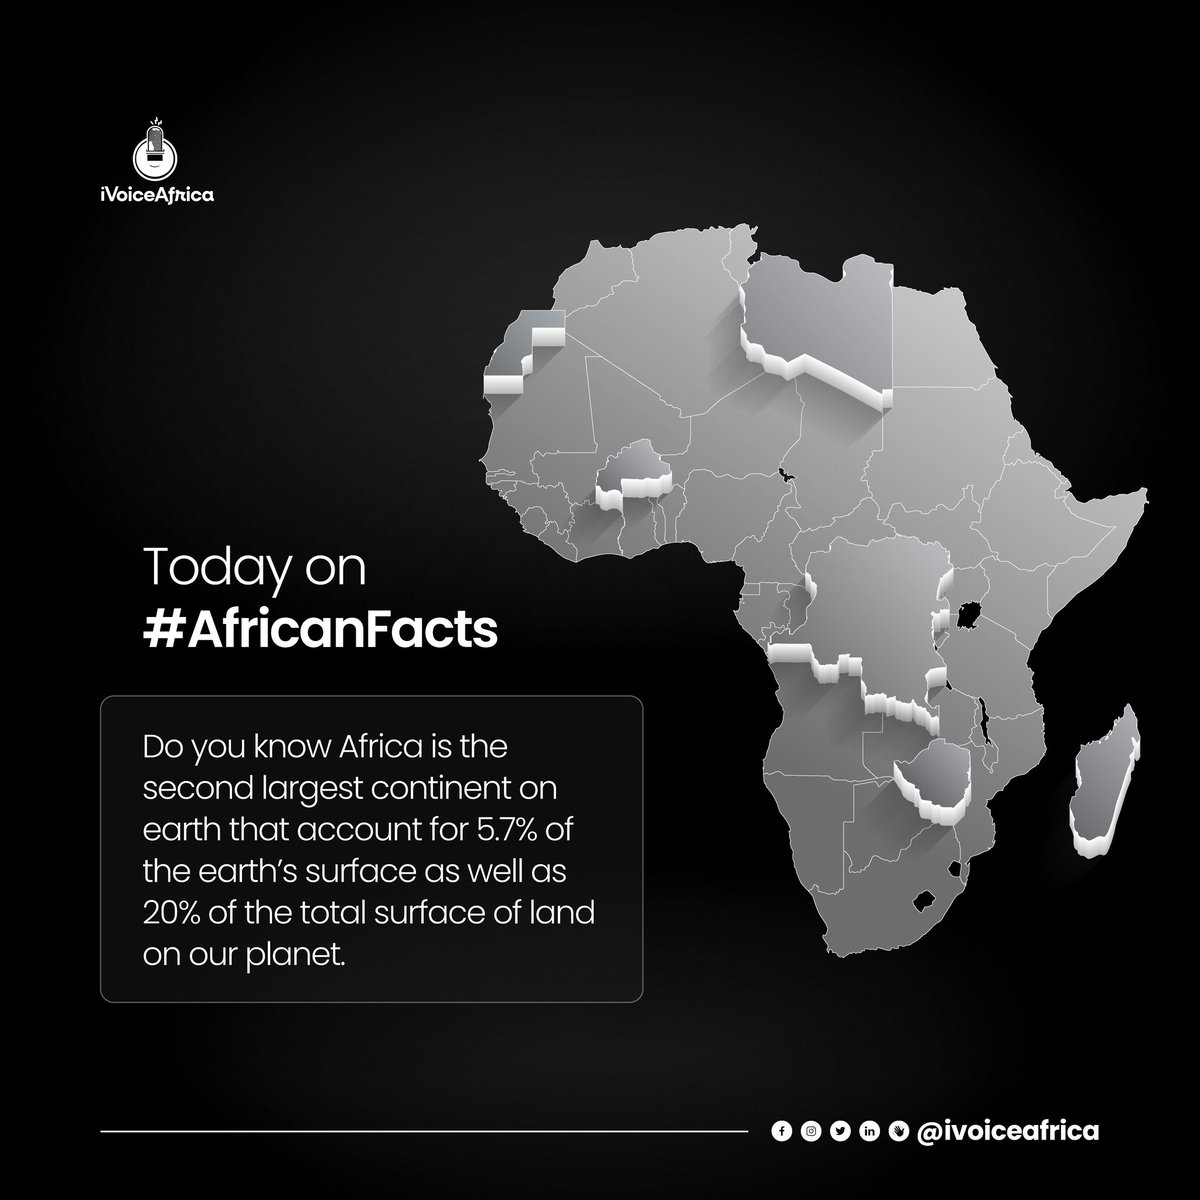 African and proud 🦚. What about you? 

Comment below if you are #AfricanAndProud

#ivoiceafrica #dailyfacts #áfrica #factsoflife #worldfacts #localizationagency #instafacts #localization #southafrica #didyouknowfacts #bigfacts #africanamazing #amazingfacts #realfacts